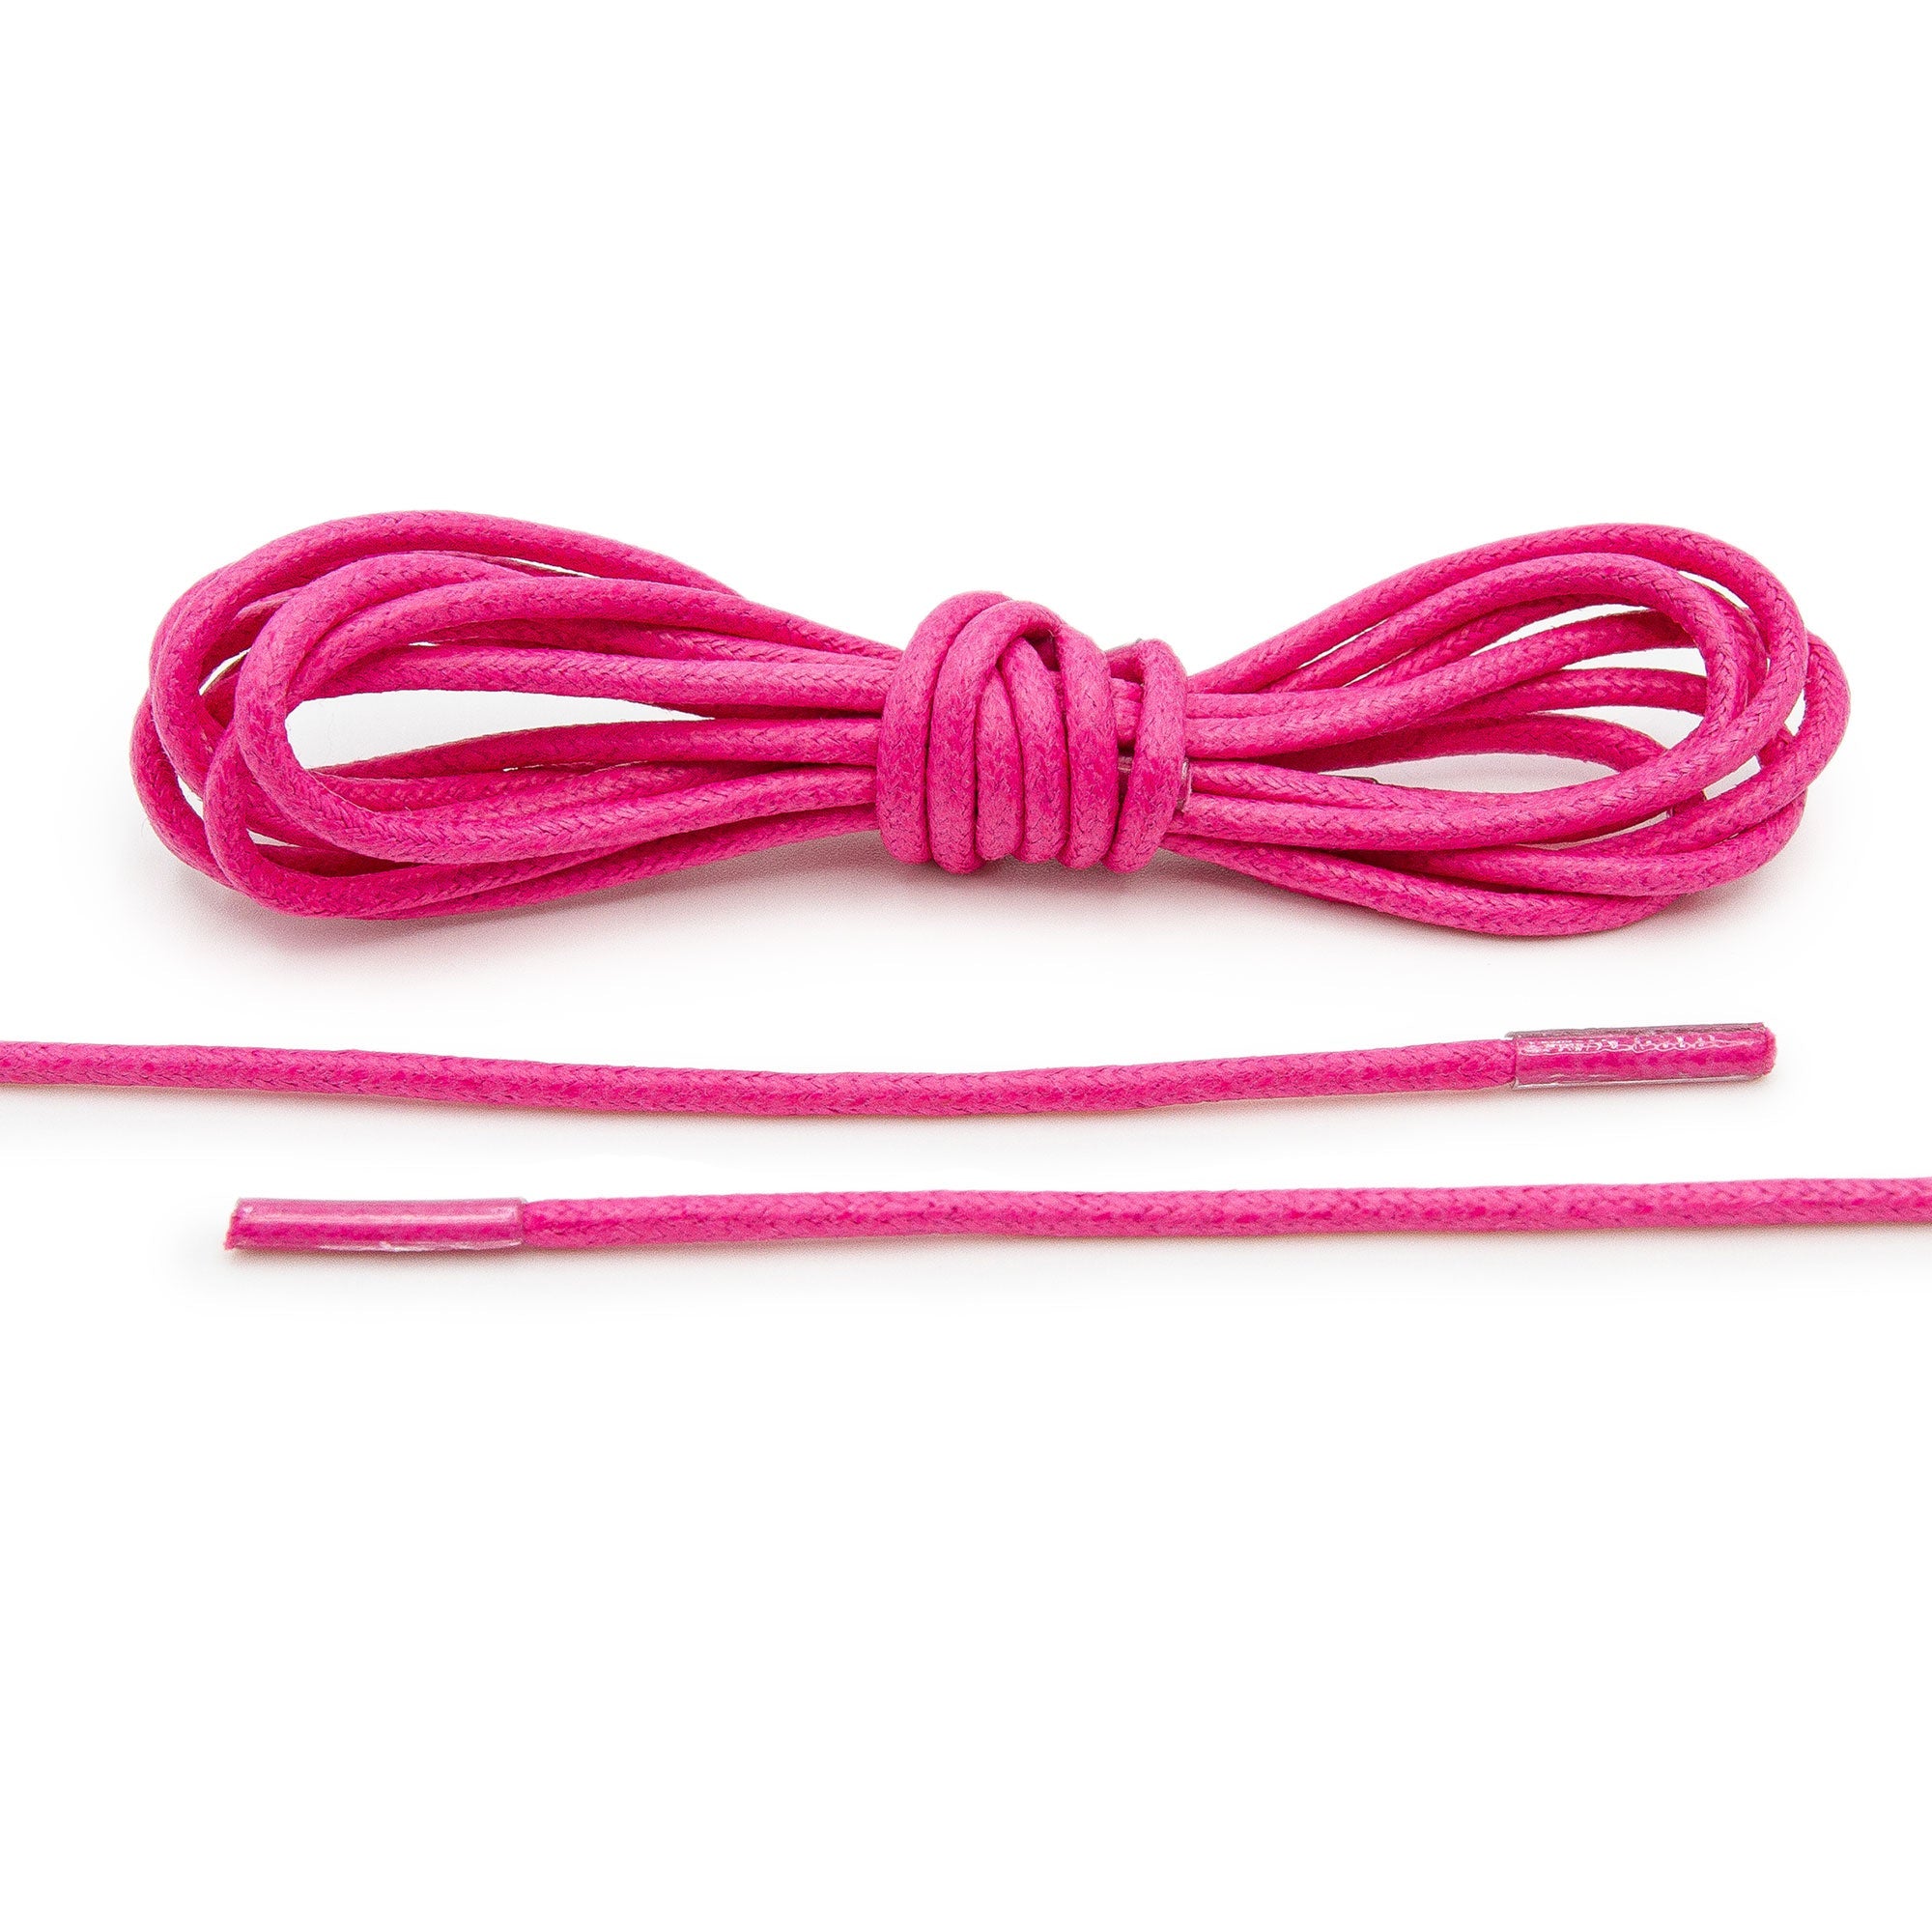 Hot Pink Waxed Dress Shoelaces - Angelus Direct